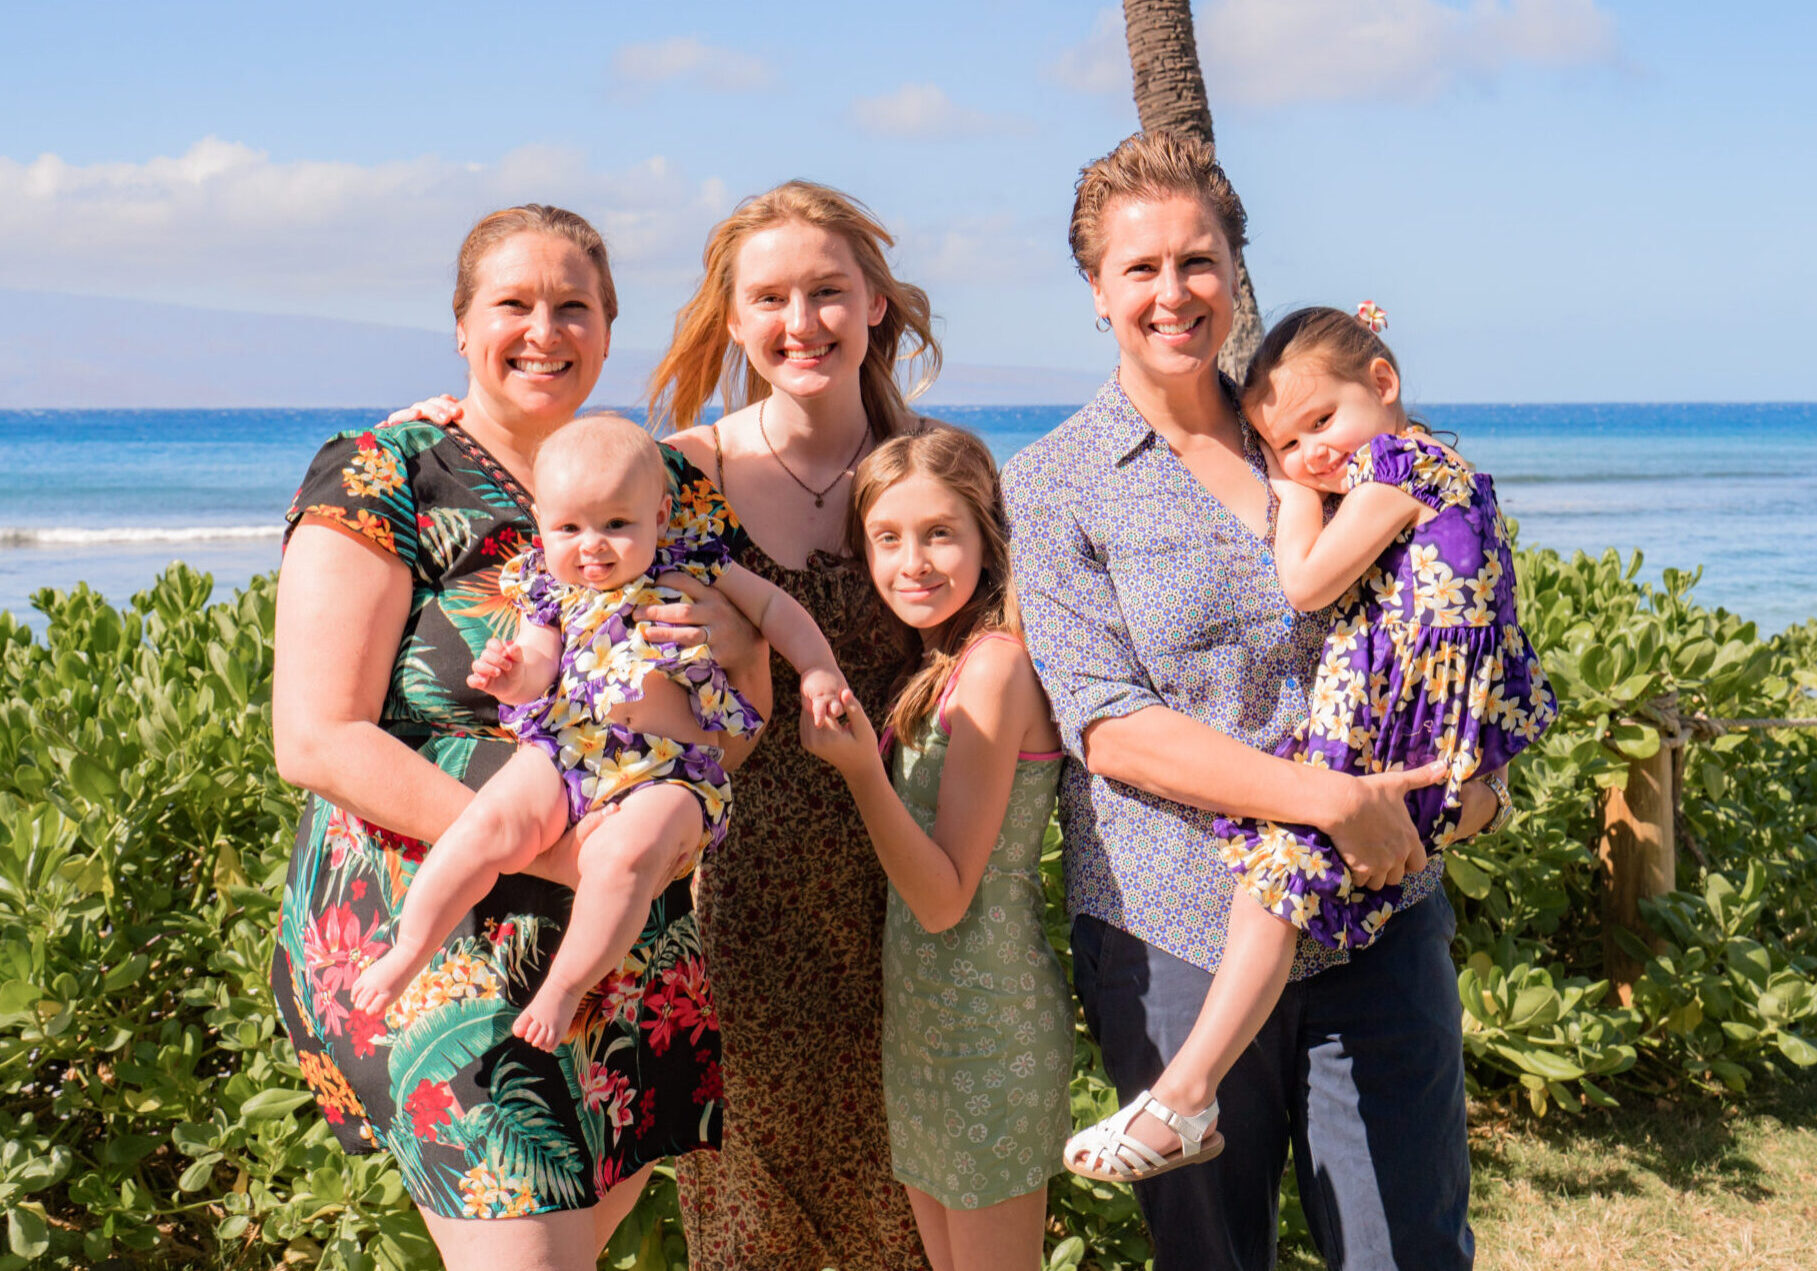 Image of Lorie Burch, Kimberly Kantor, and their children in Hawaii.